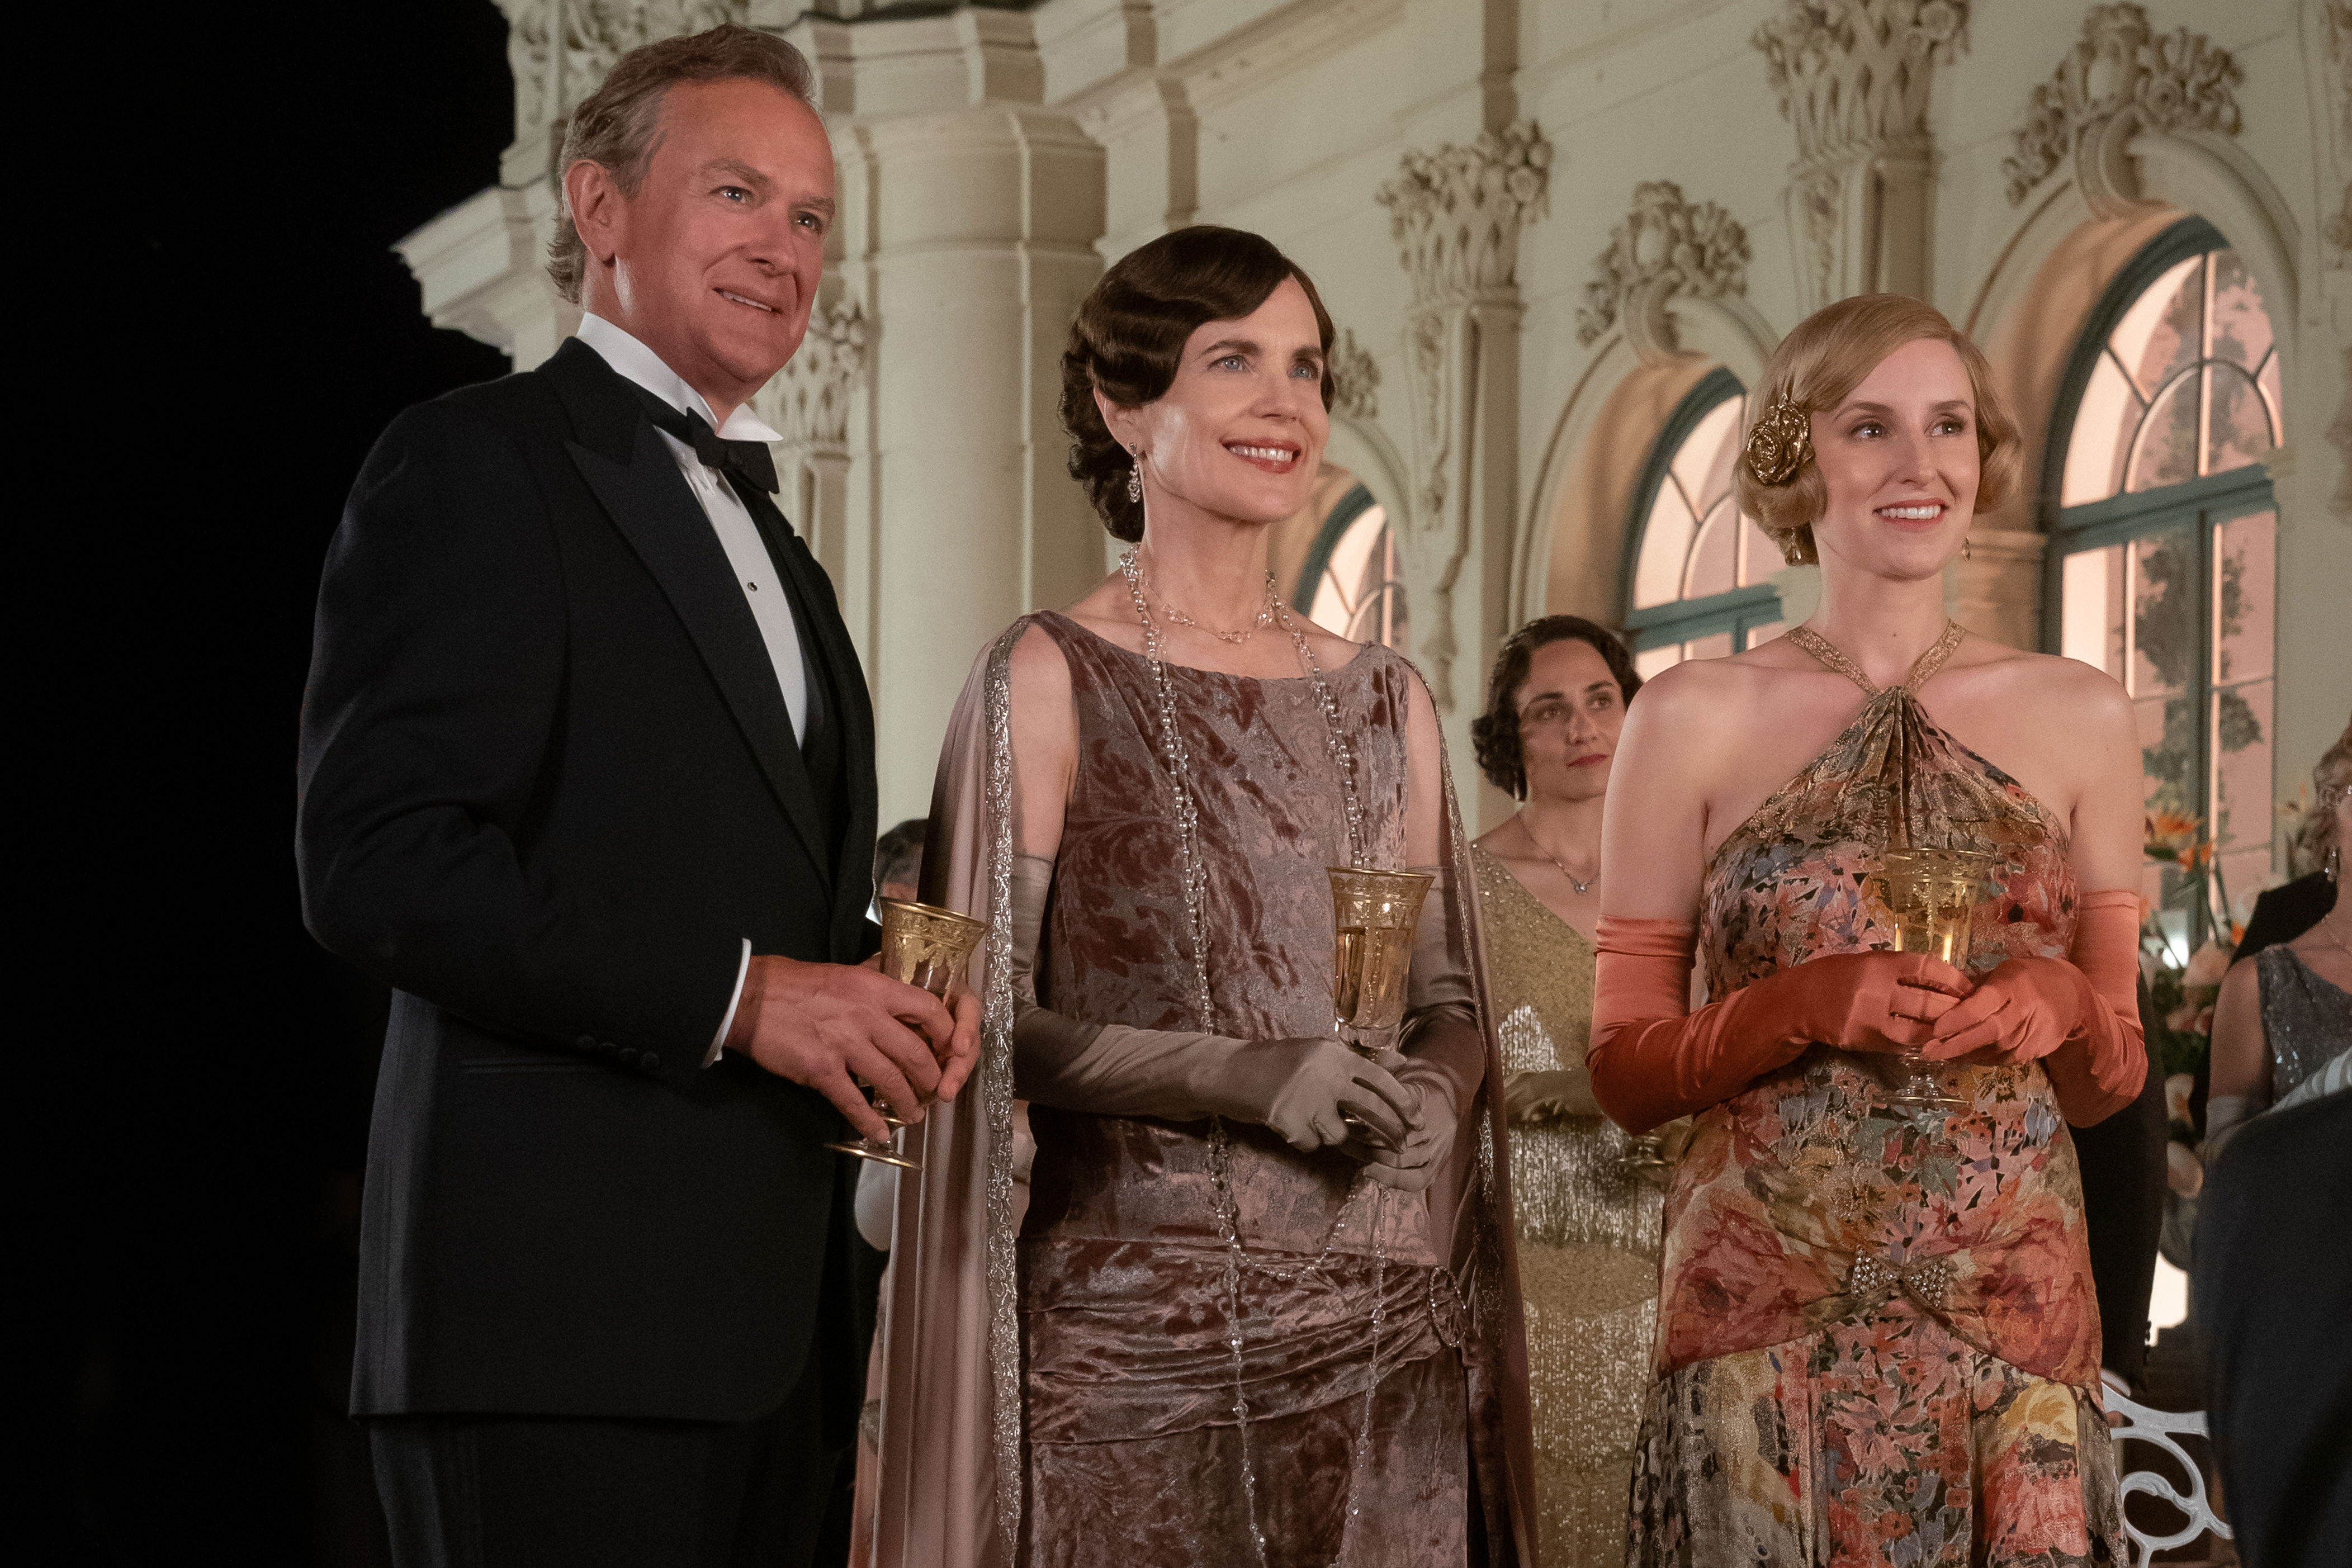 <p>Robert Crawley, the Earl of Grantham (played by Hugh Bonneville) suited up in a tuxedo while wife <span>Cora Crawley, Countess of Grantham (played by Elizabeth McGovern) wore a crushed velvet dress with a satin cape and middle daughter Edith Pelham, Marchioness of Hexham (played by Laura Carmichael) donned a halter-style floral gown and satin gloves in the 2022 film "Downton Abbey: A New Era</span>," which is set in 1928 at the tail end of the Roaring '20s before the Great Depression begins.</p><p>MORE: <a href="https://www.wonderwall.com/style/fashion/best-period-costumes-all-time-tv-movies-3011841.gallery">The best period series and movie costumes of all time</a></p>